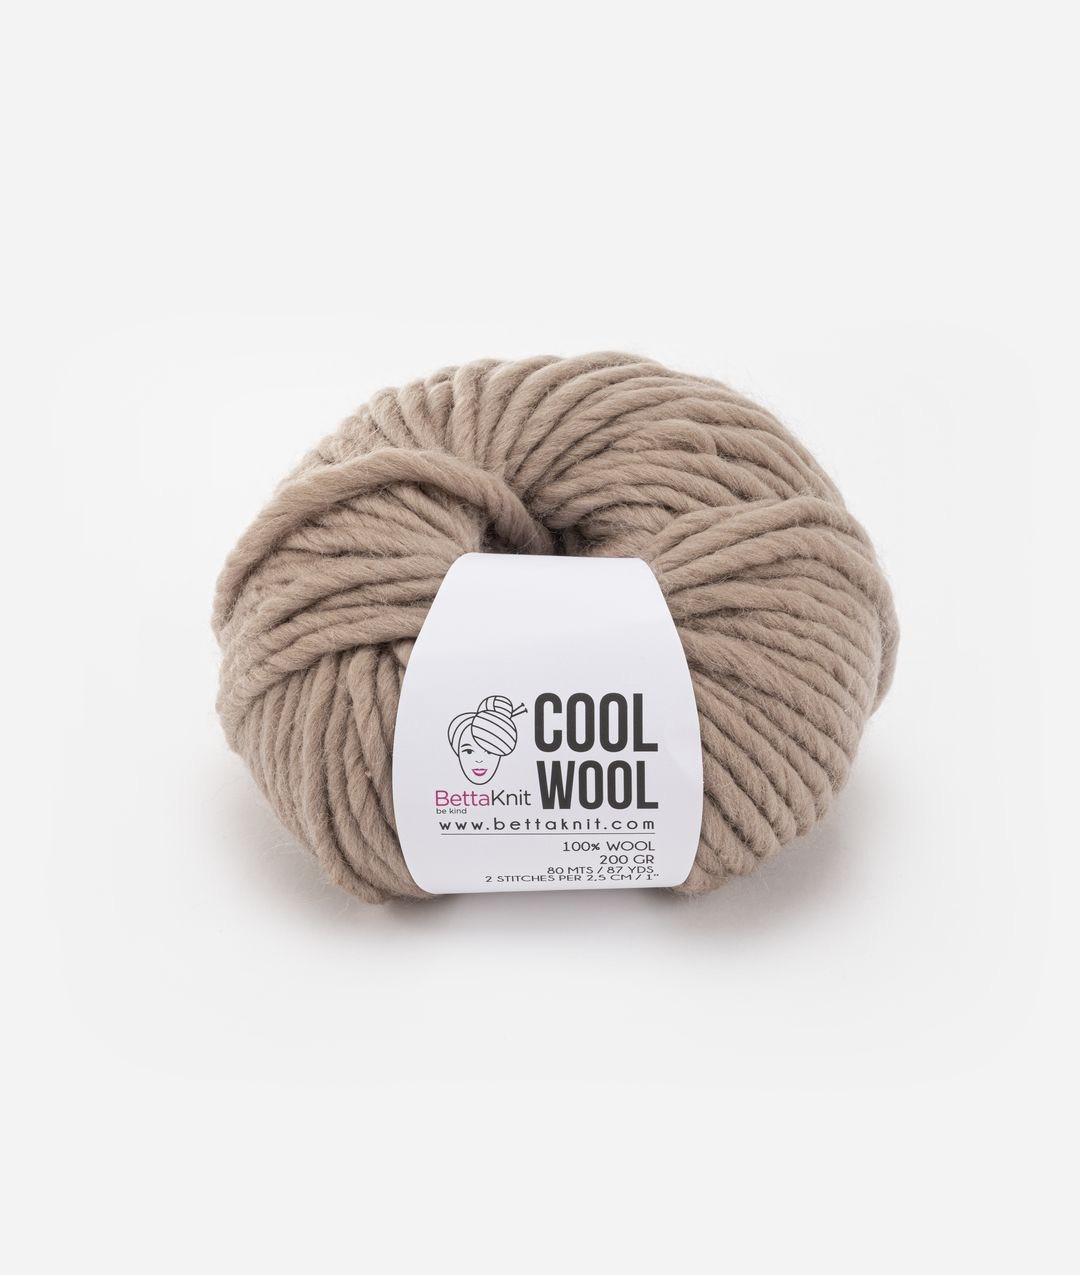 Ball set Cool Wool pure wool by BettaKnit, Beige, large image number 0